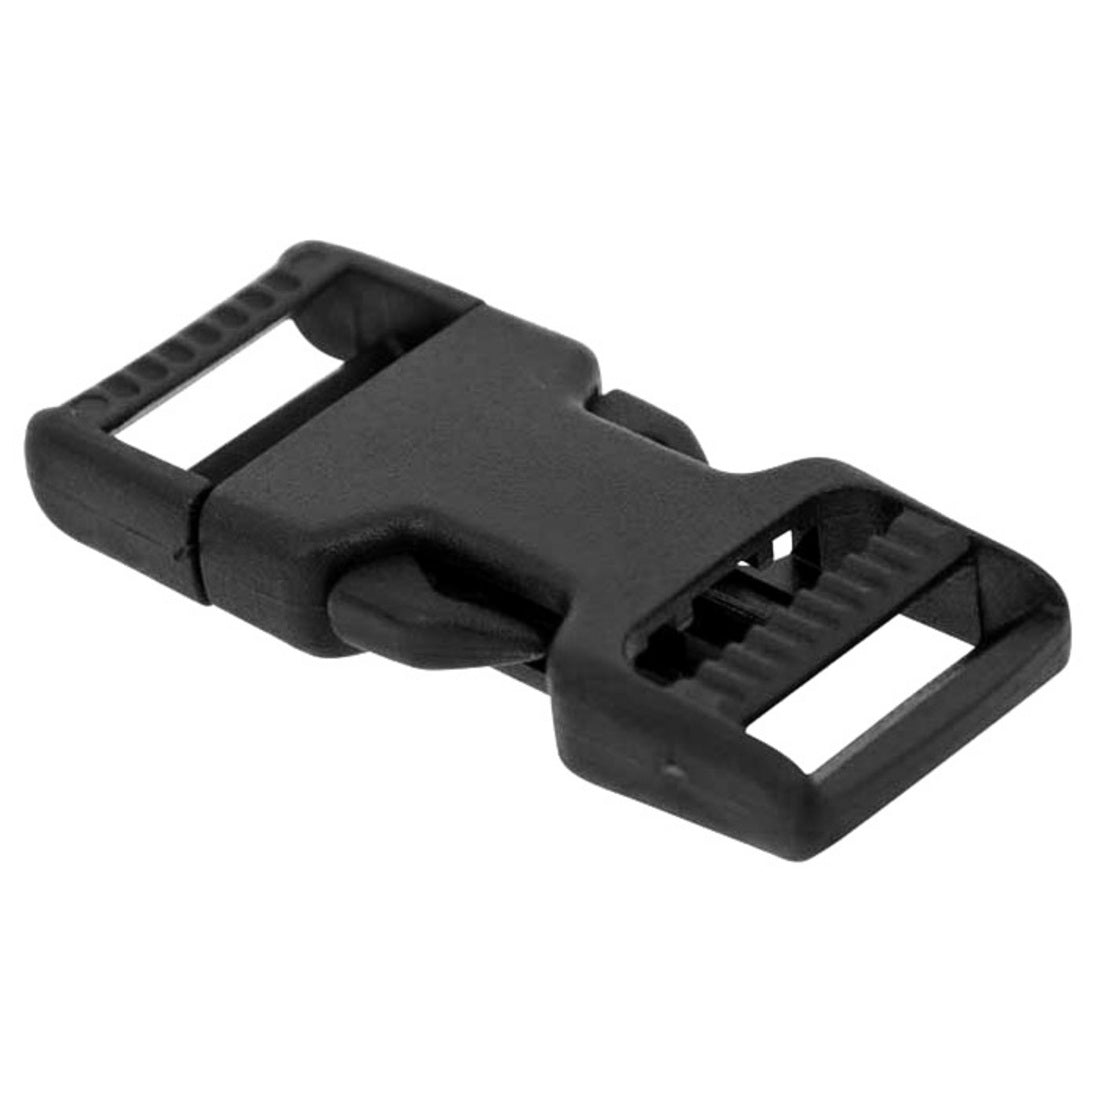 Peregrine Outfitters Dual Adjust SR Buckle